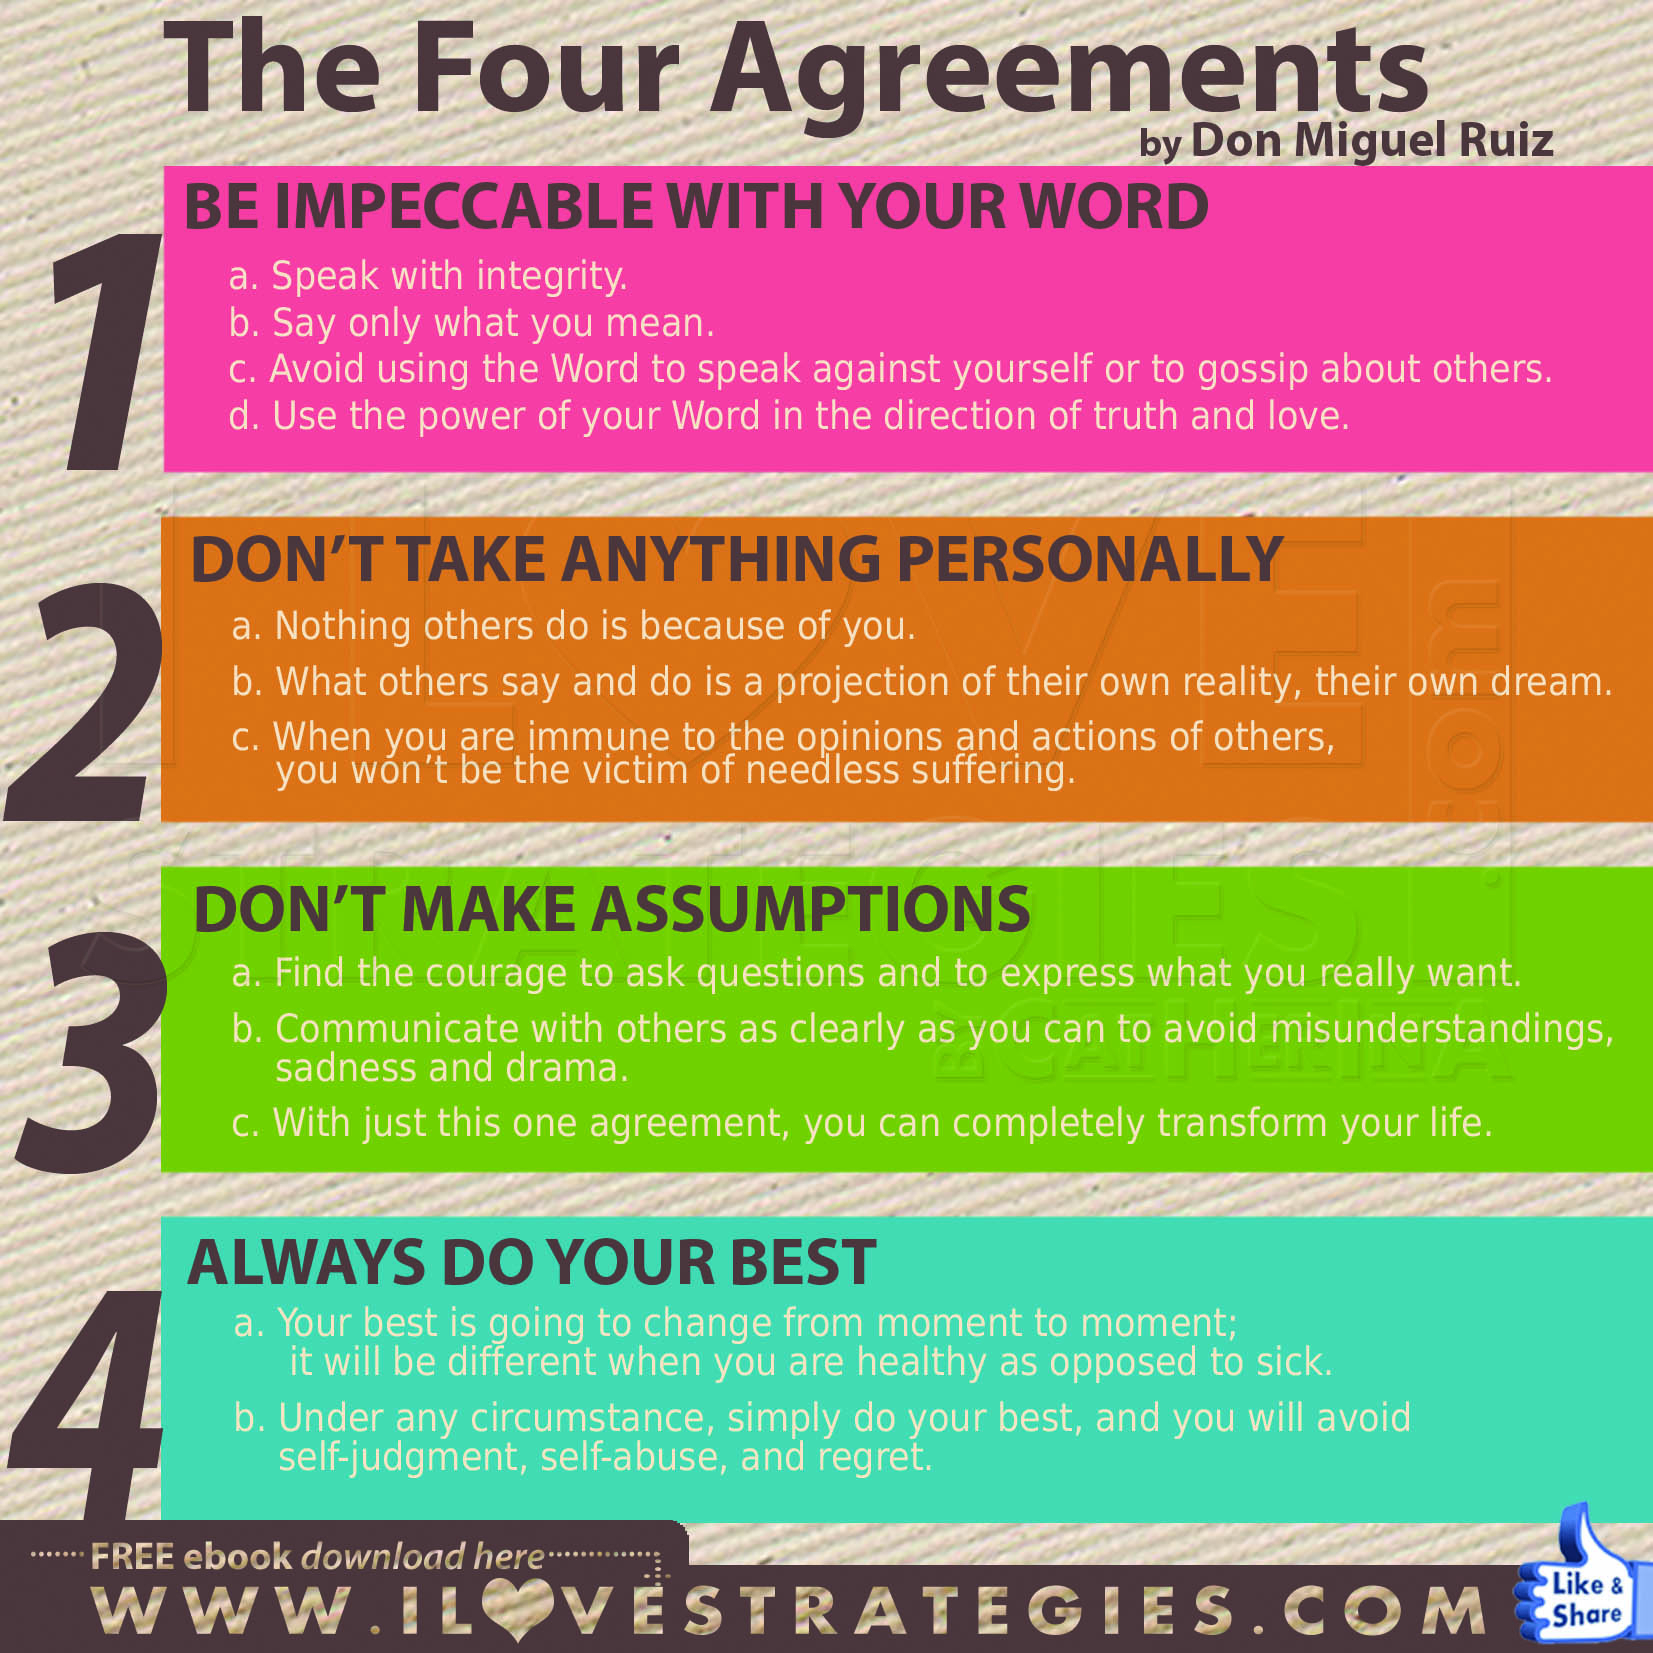 Four Agreements Book Free Download The Four Agreements Book Recommendation Phoebe Jenkins